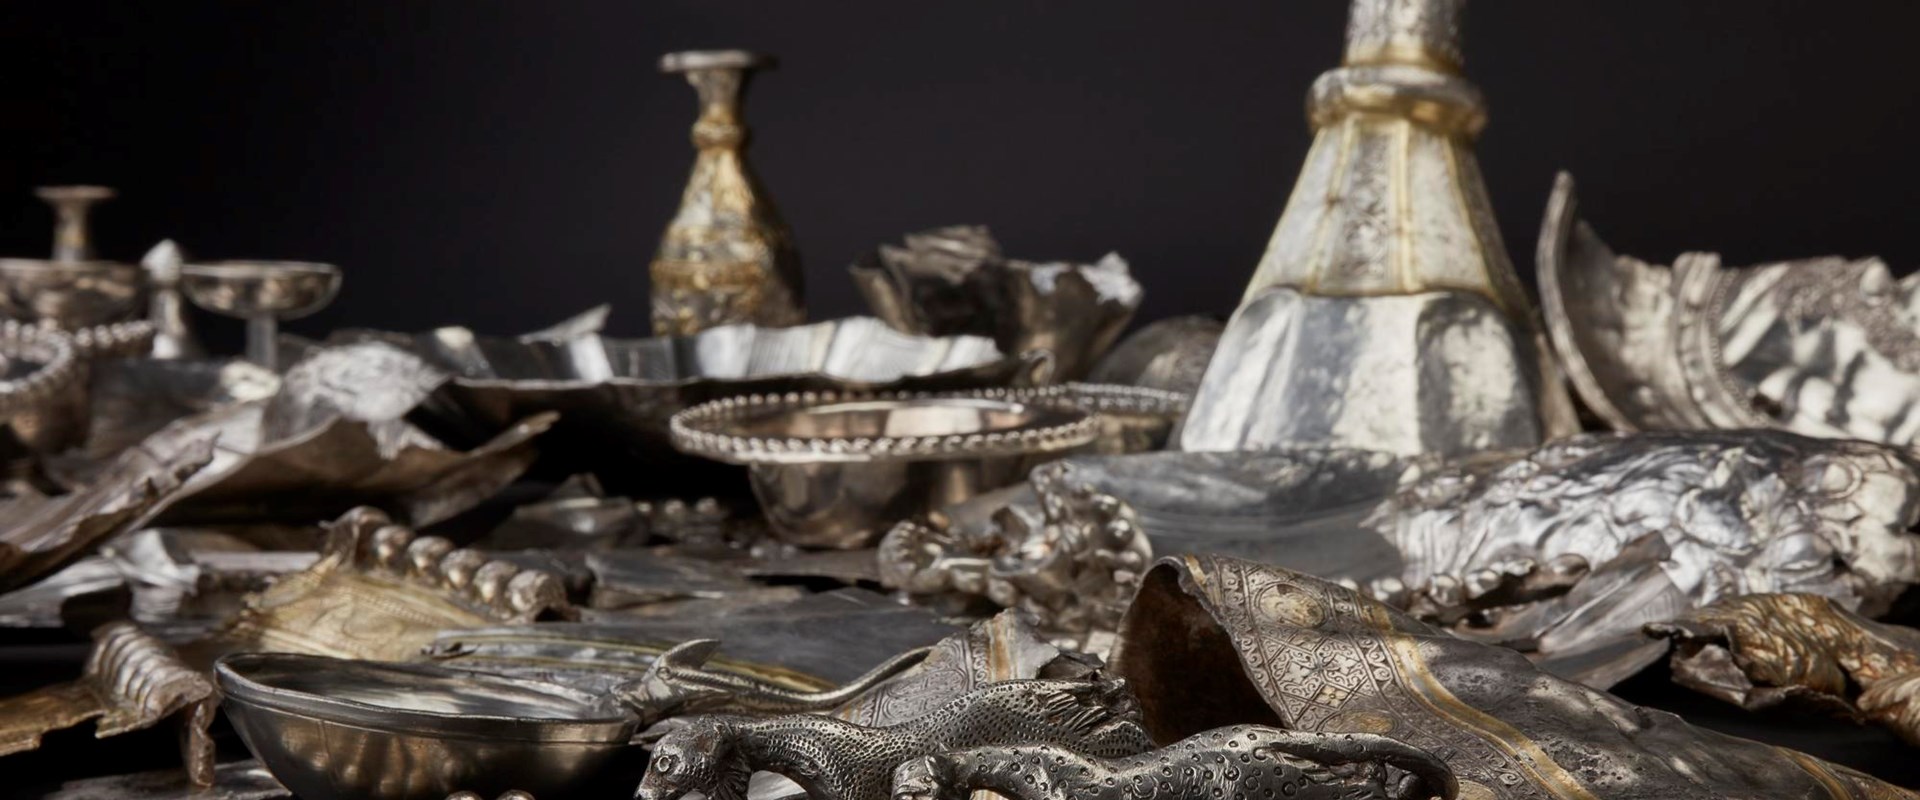 Mass of hacked silver objects including plates, cups, and two speckled figurines of panthers or lionesses.